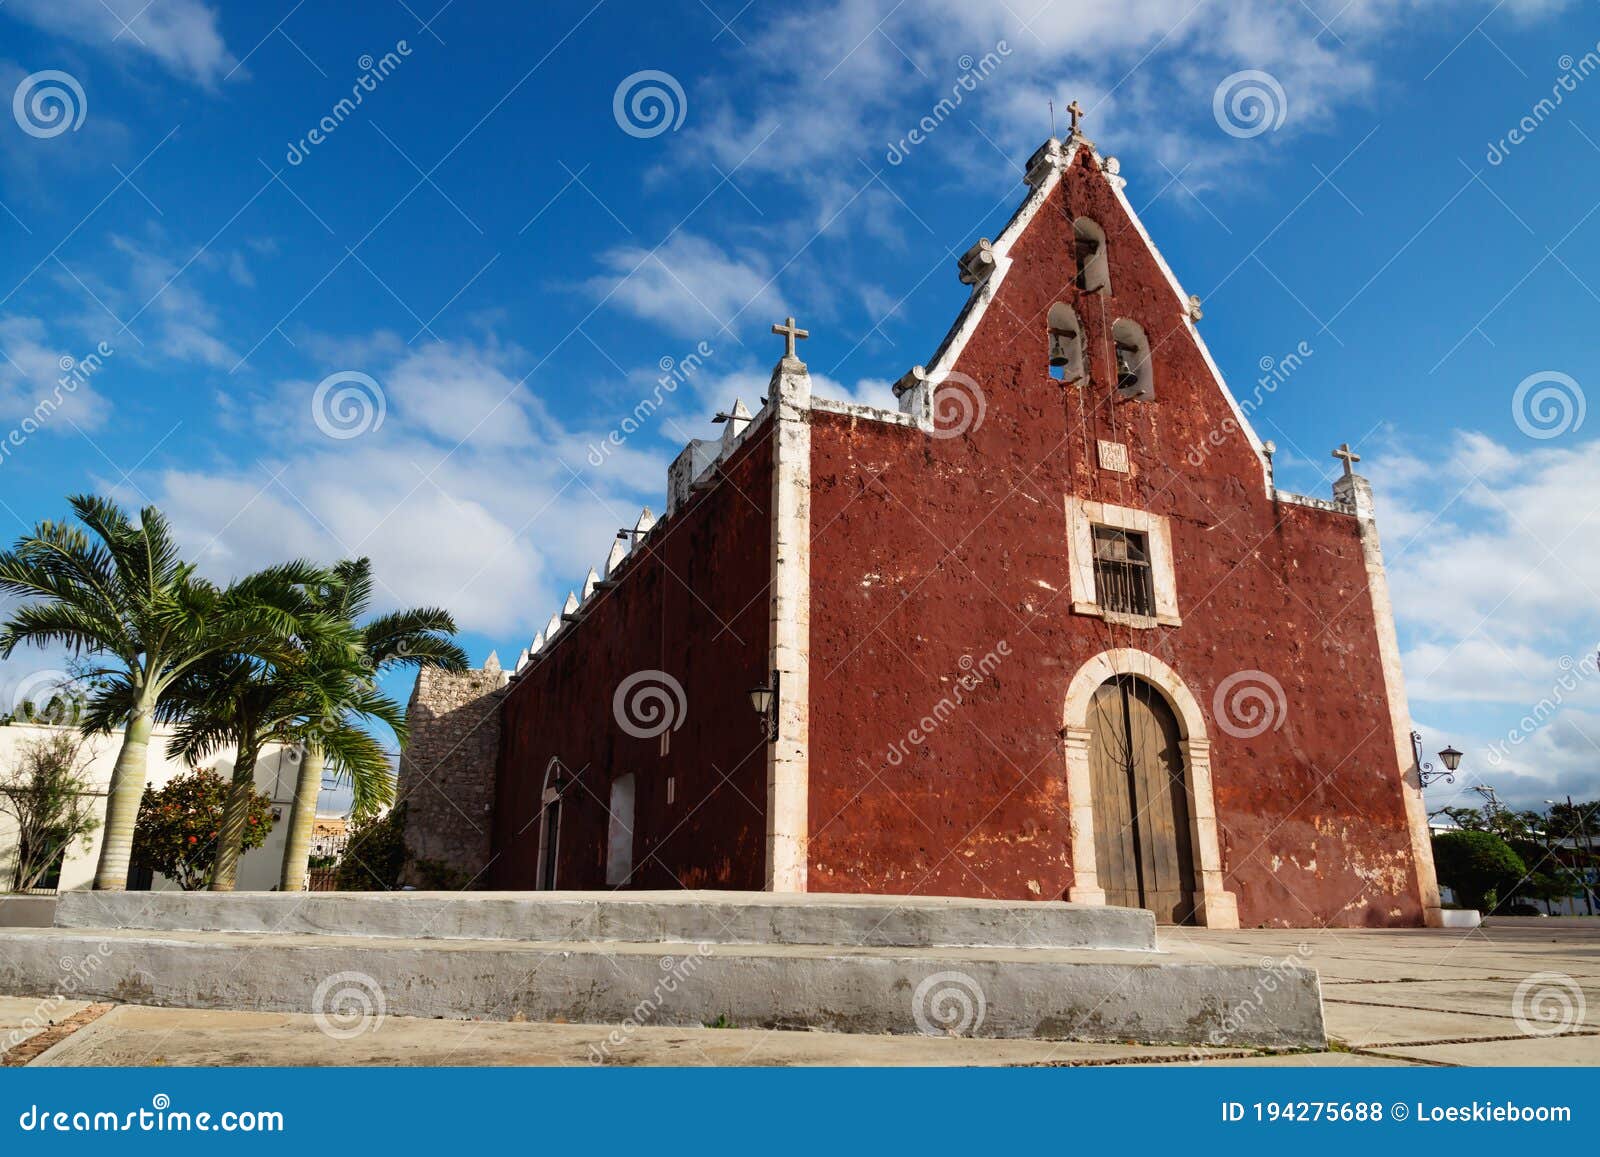 red colonial church itzimna in a park with palm trees, merida, yucatan, mexico